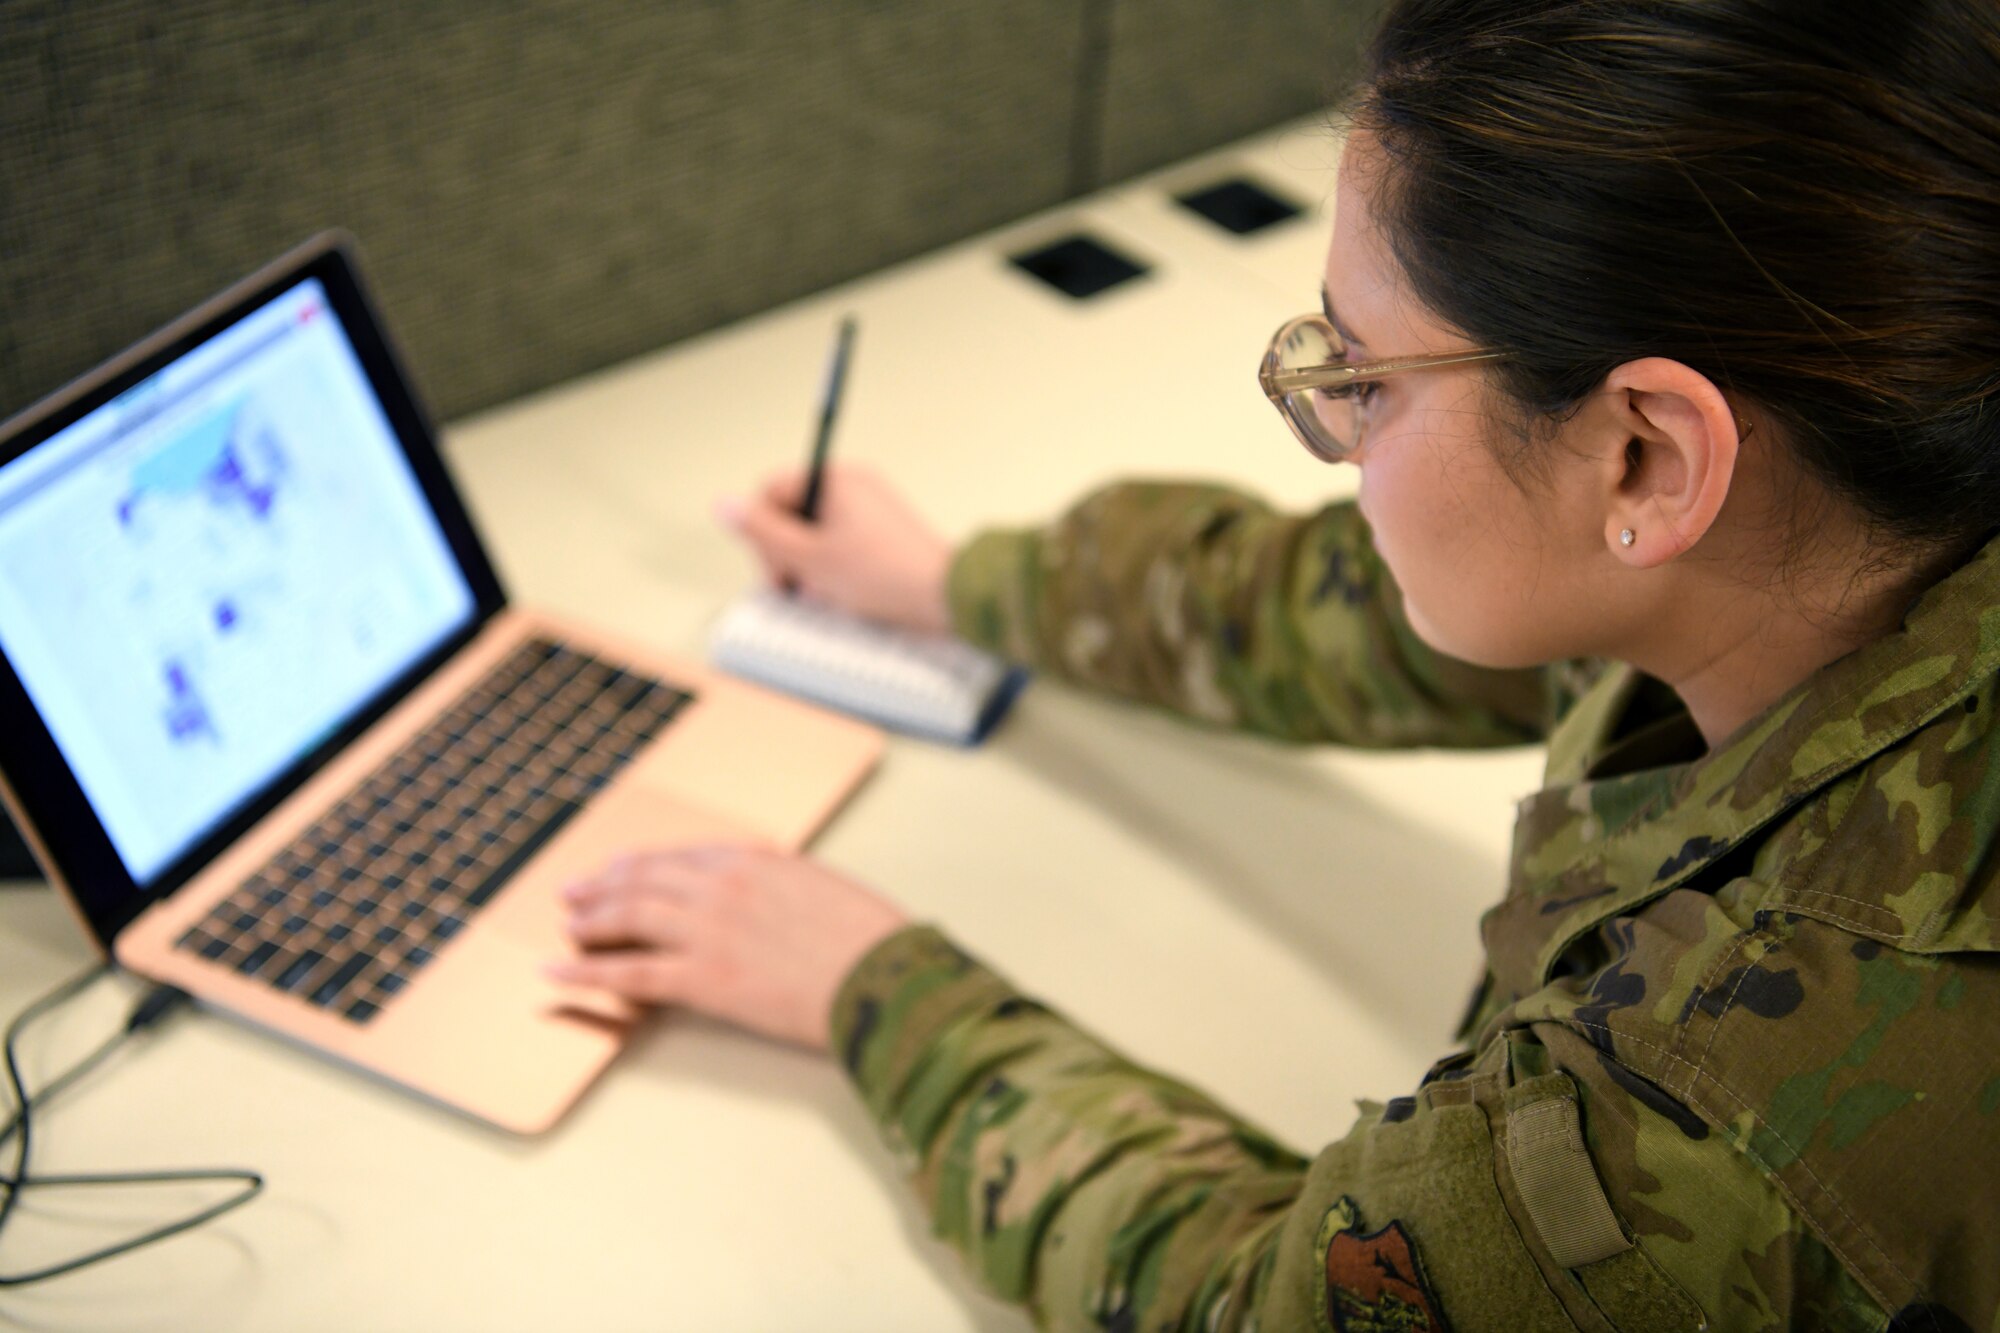 Senior Airman Elise, an analyst assigned to the 178th Wing, analyzes a map of counties throughout Ohio March 30, 2020, at the Defense Supply Center Columbus. Elise is serving on the Joint Task Force 37 collecting data on coronavirus cases, hospitalizations and available hospital resources across the state, as well as providing weather and route information for the JTF-37 task forces supporting local food banks.